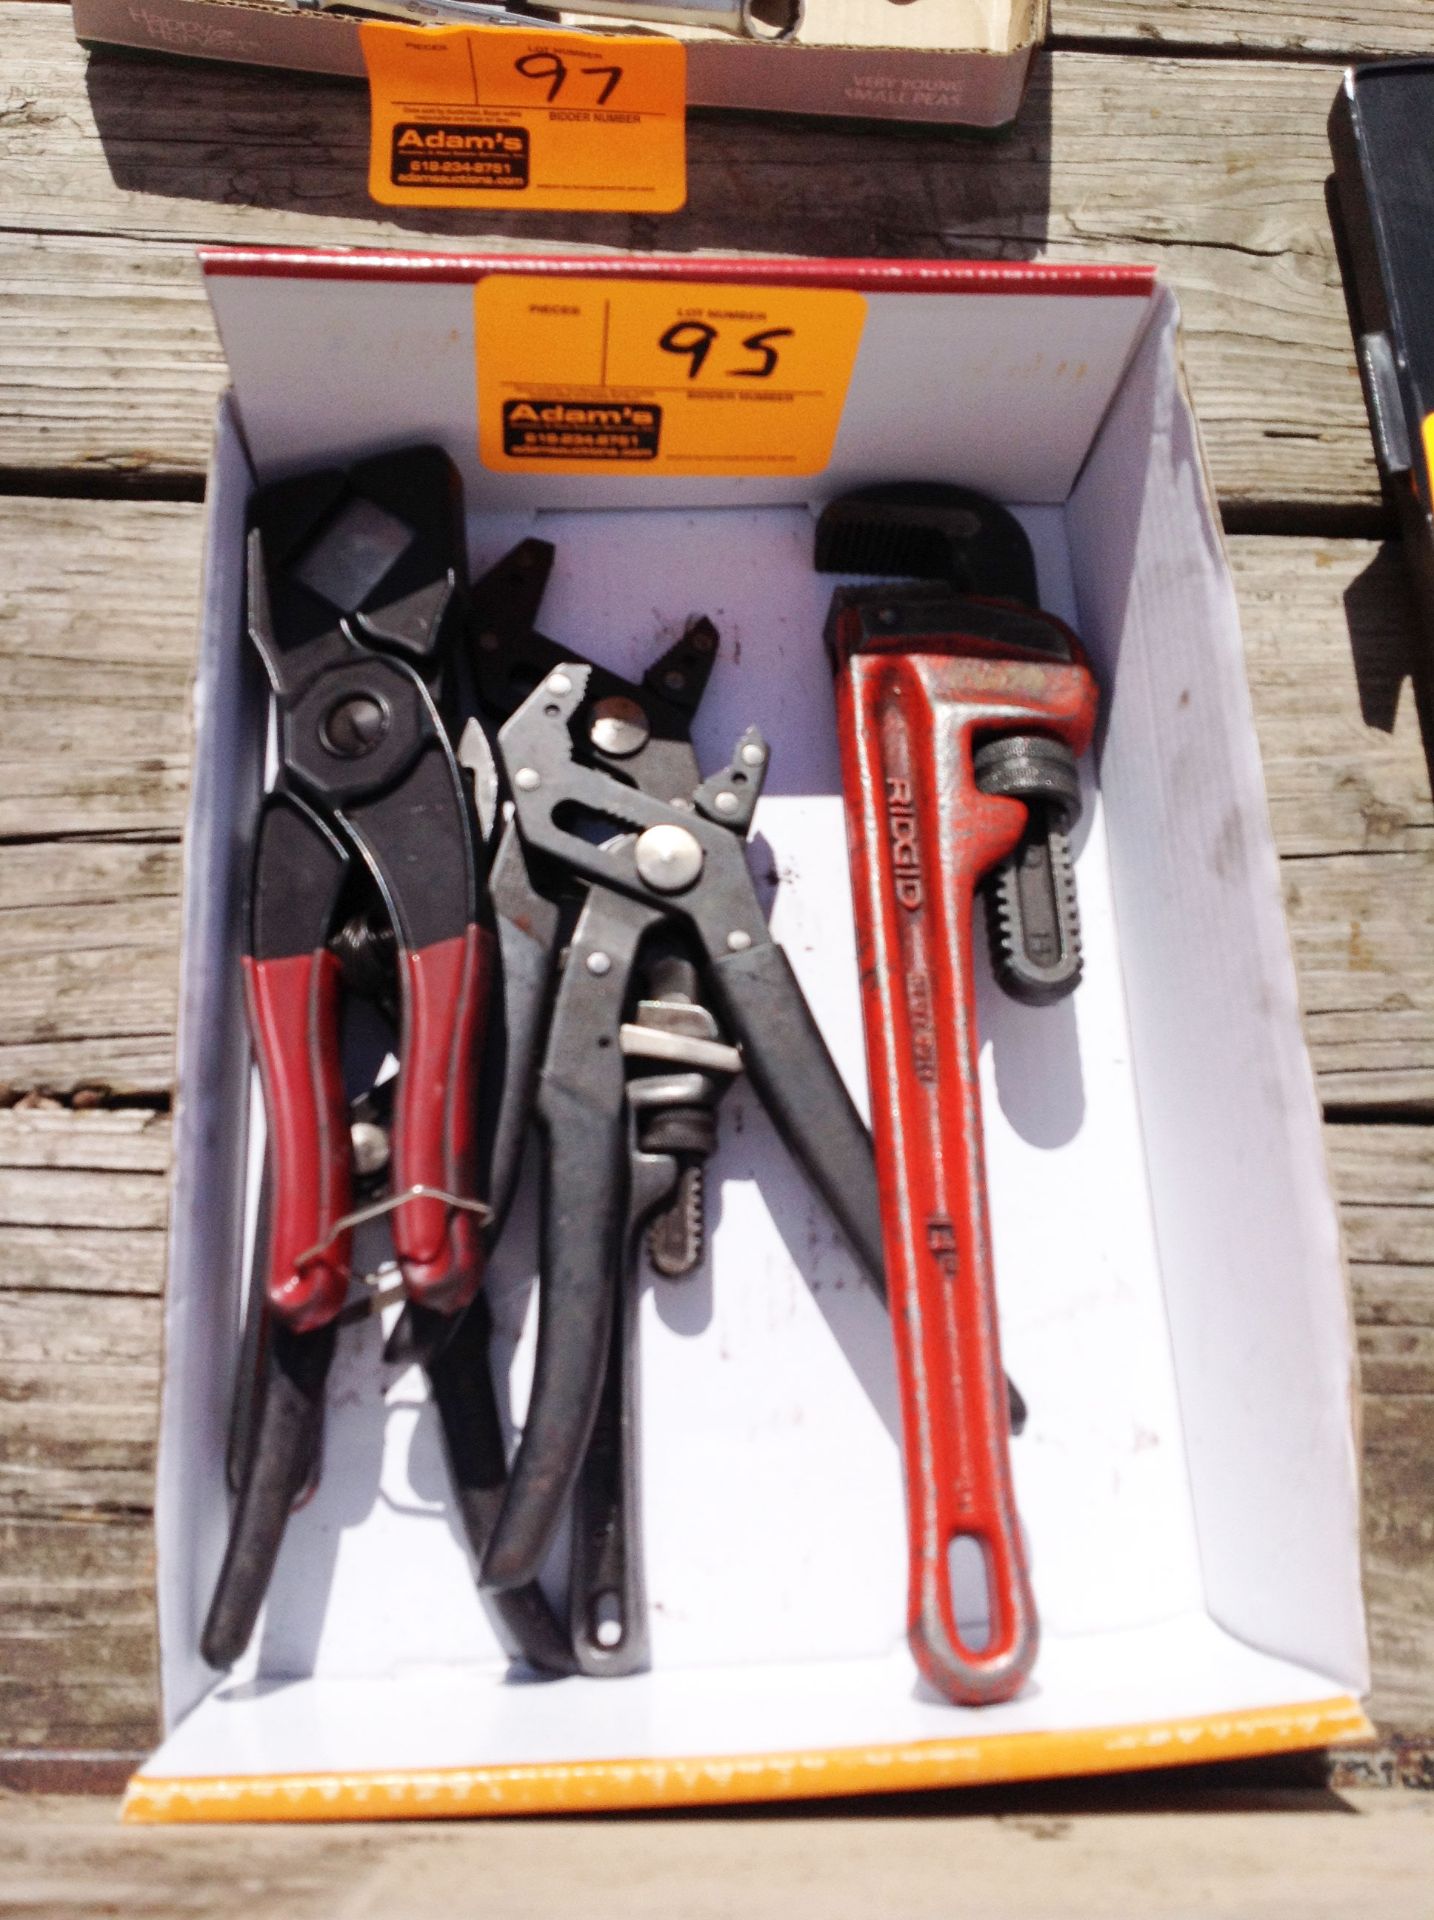 Pipe Wrenches & RoBO Grip Pliers